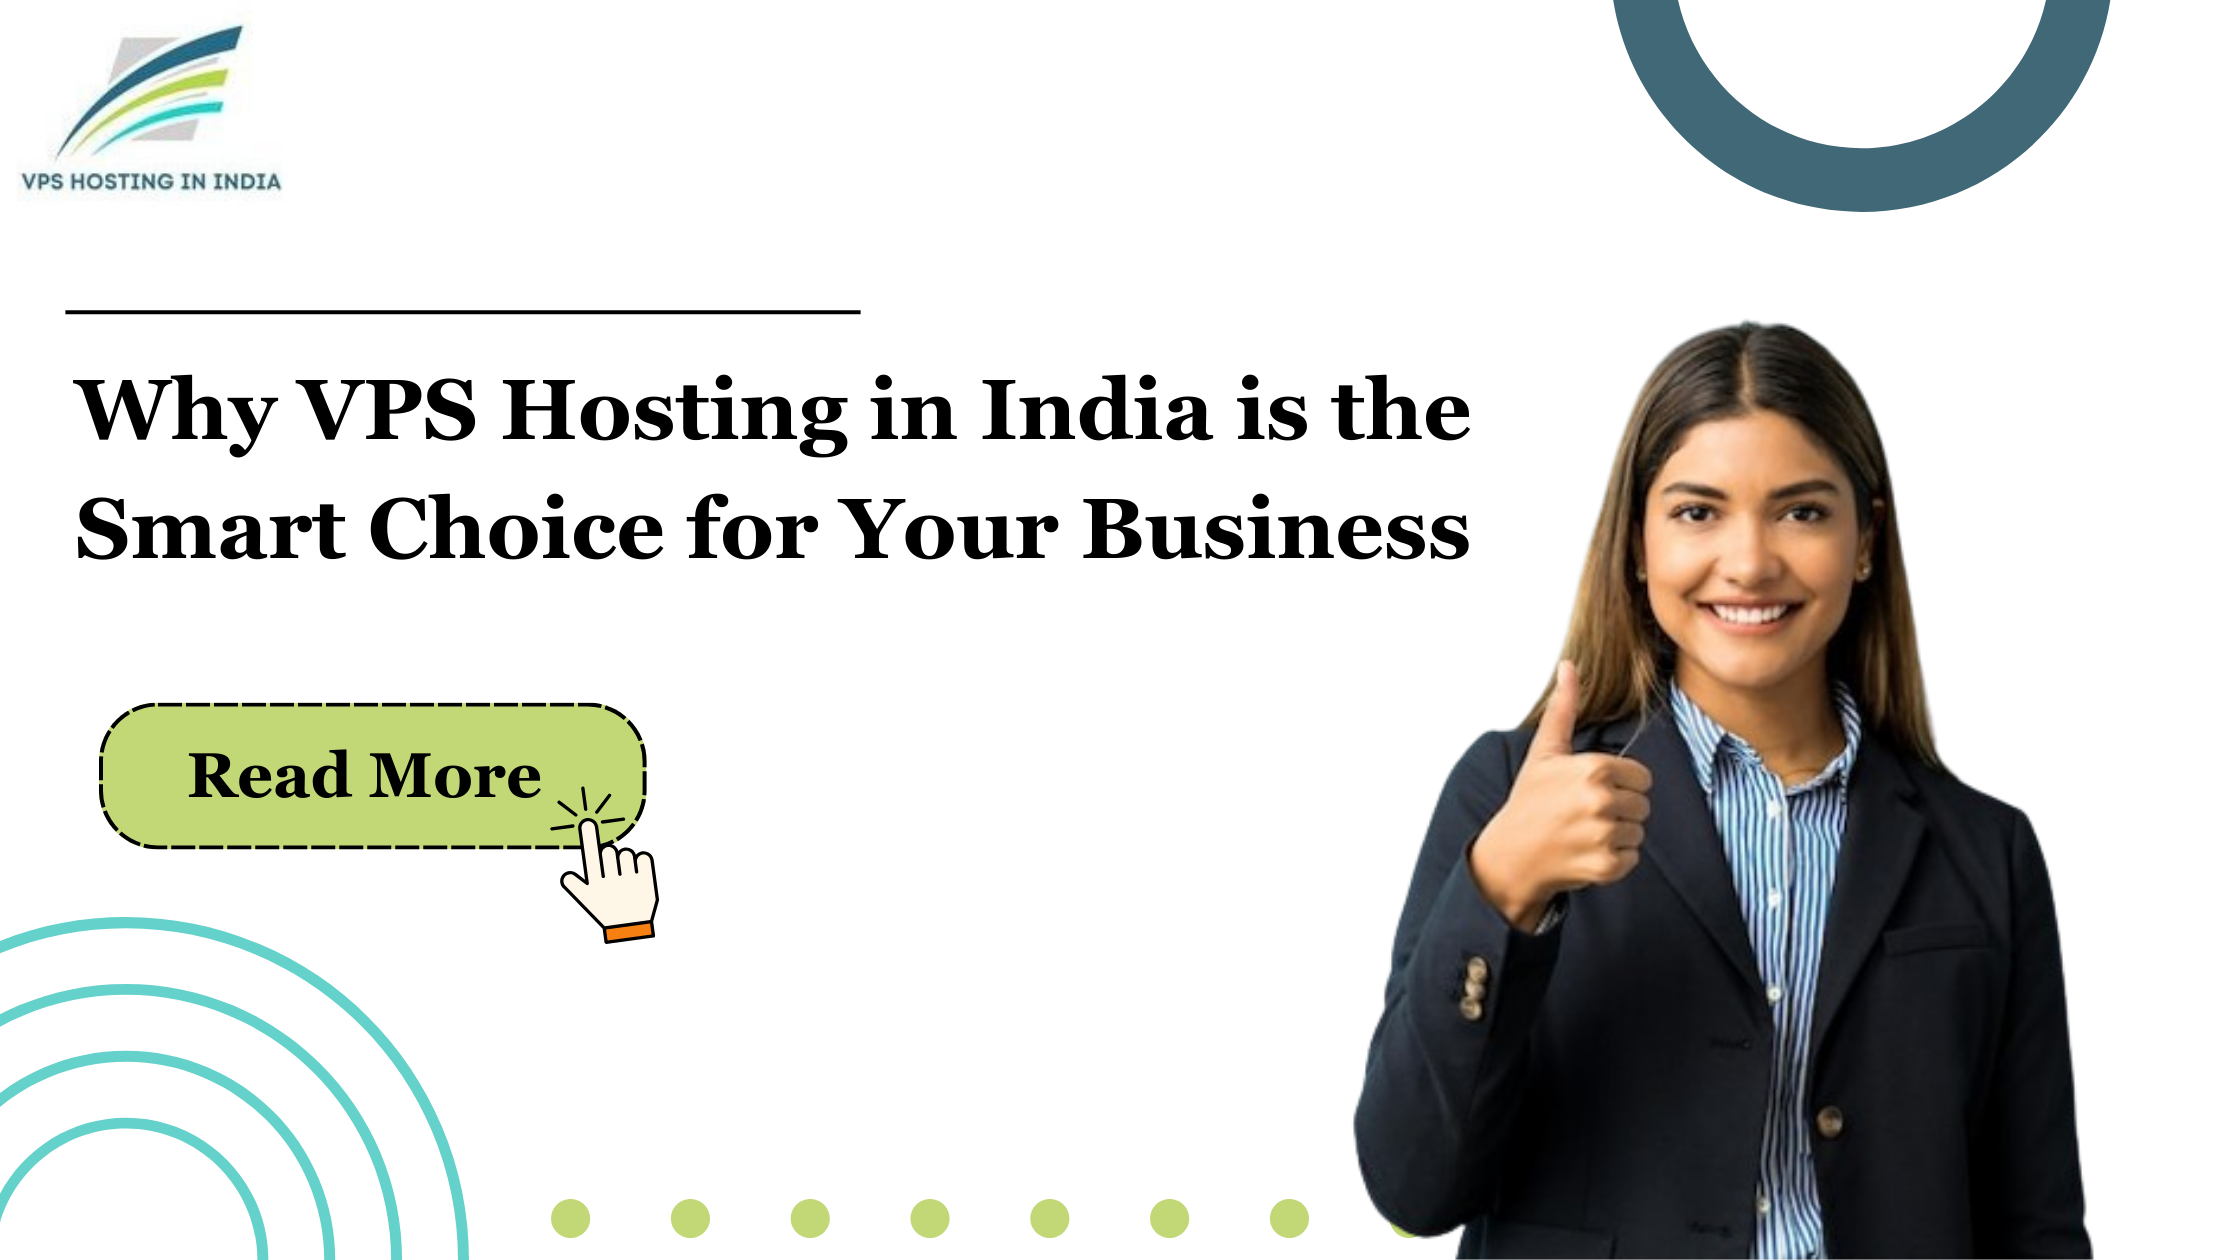 Why VPS Hosting in India is the Smart Choice for Your Business